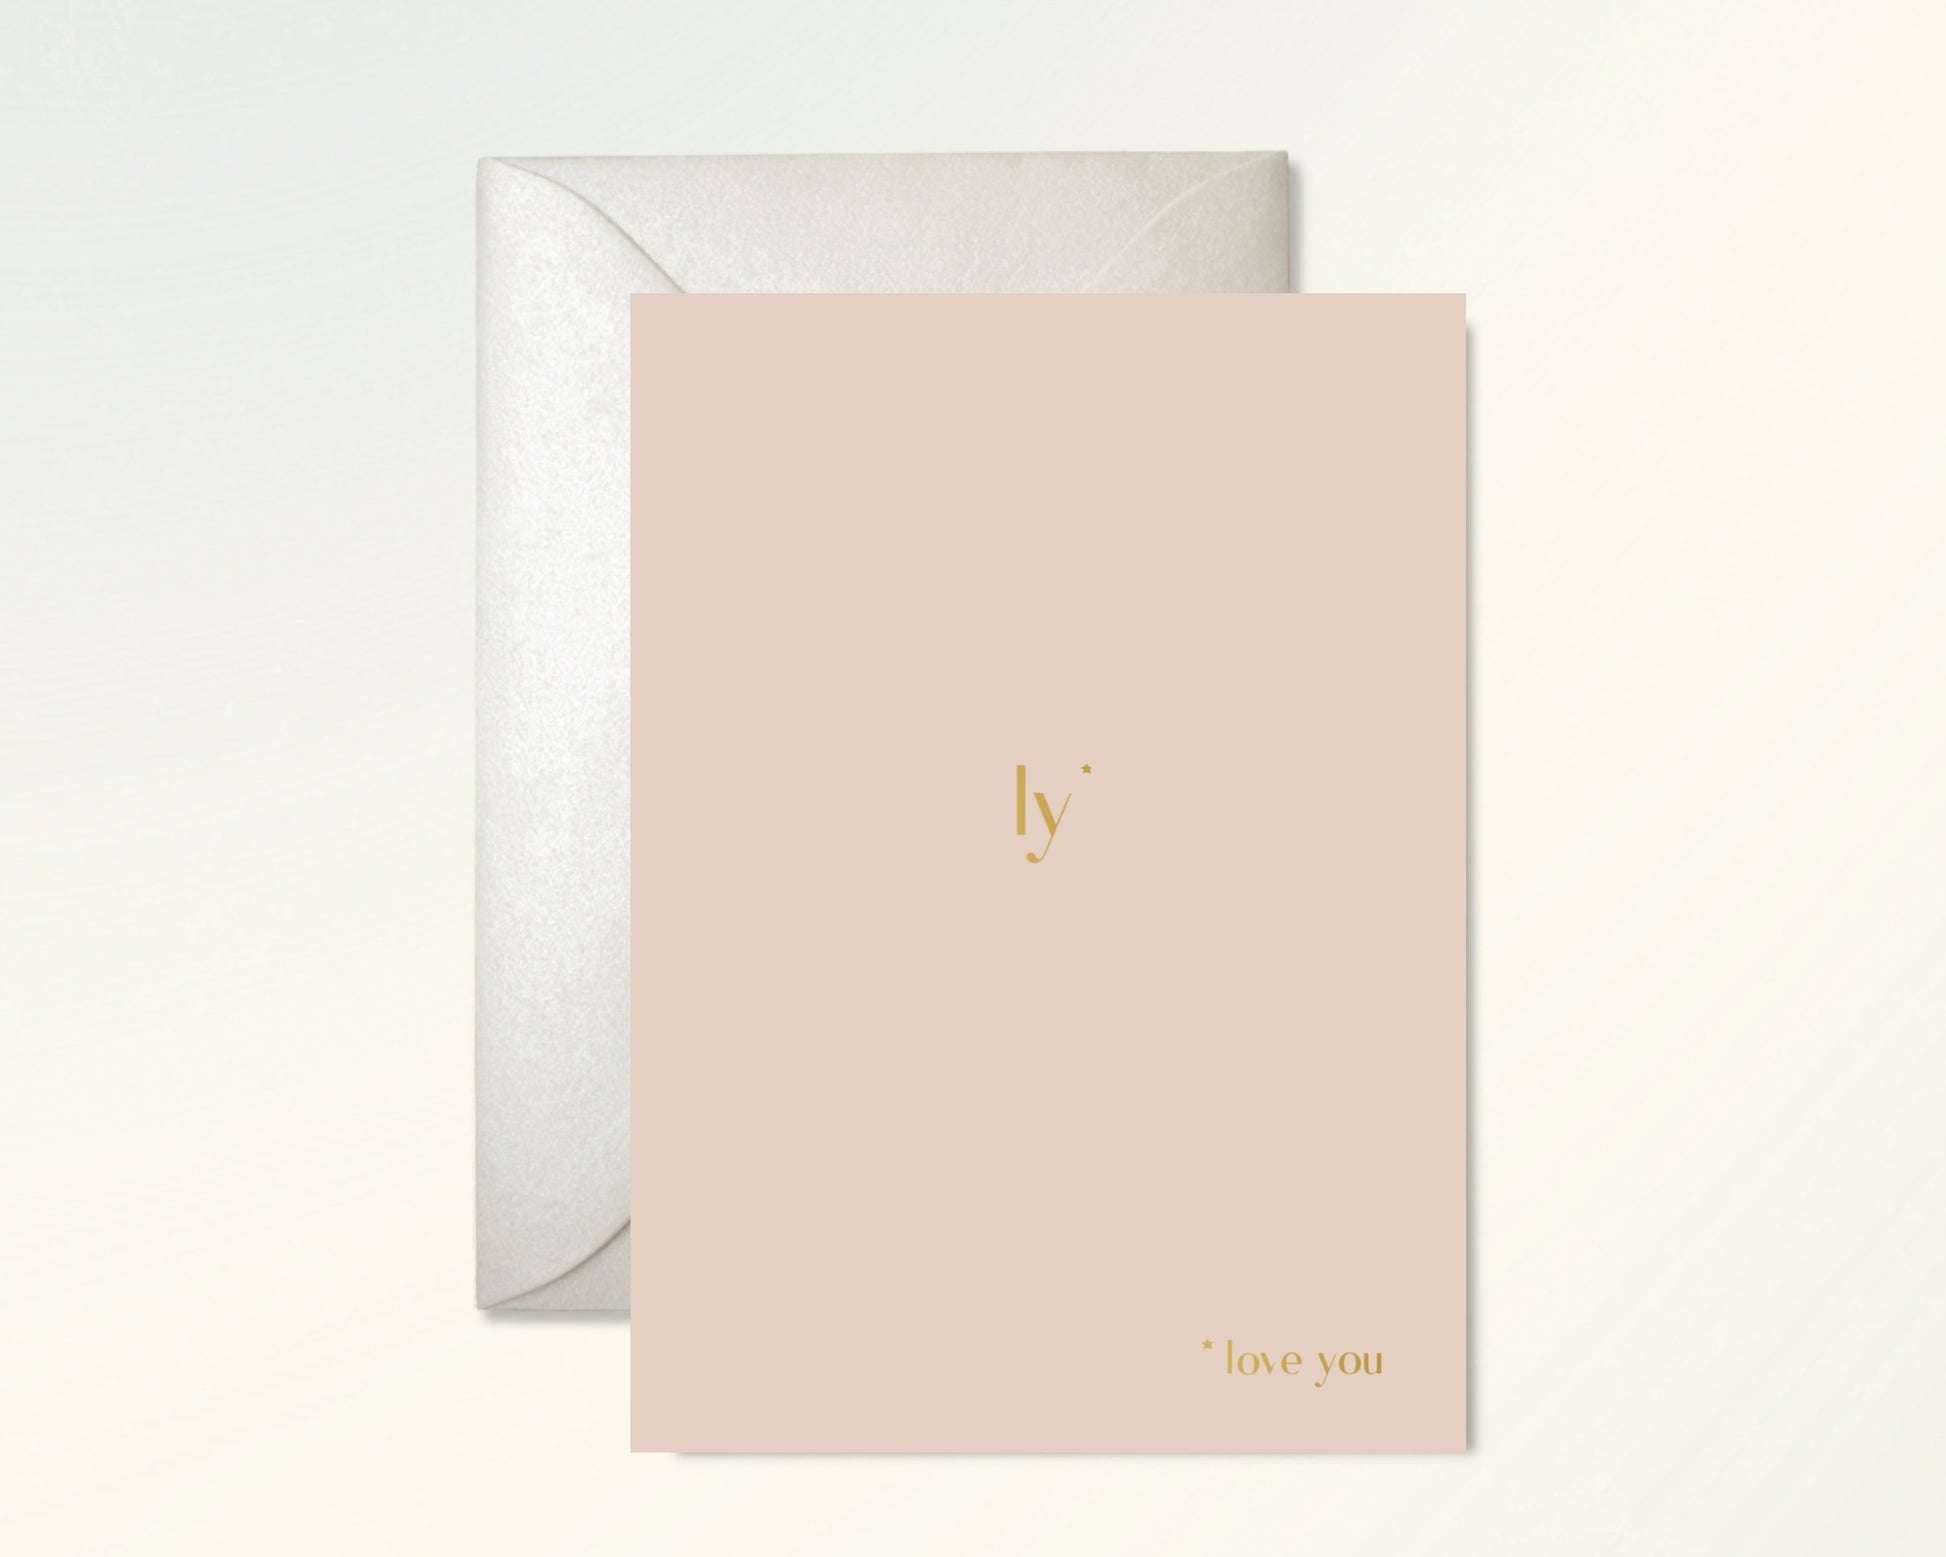 LY *Love You Greeting Cards - Honeypress Design